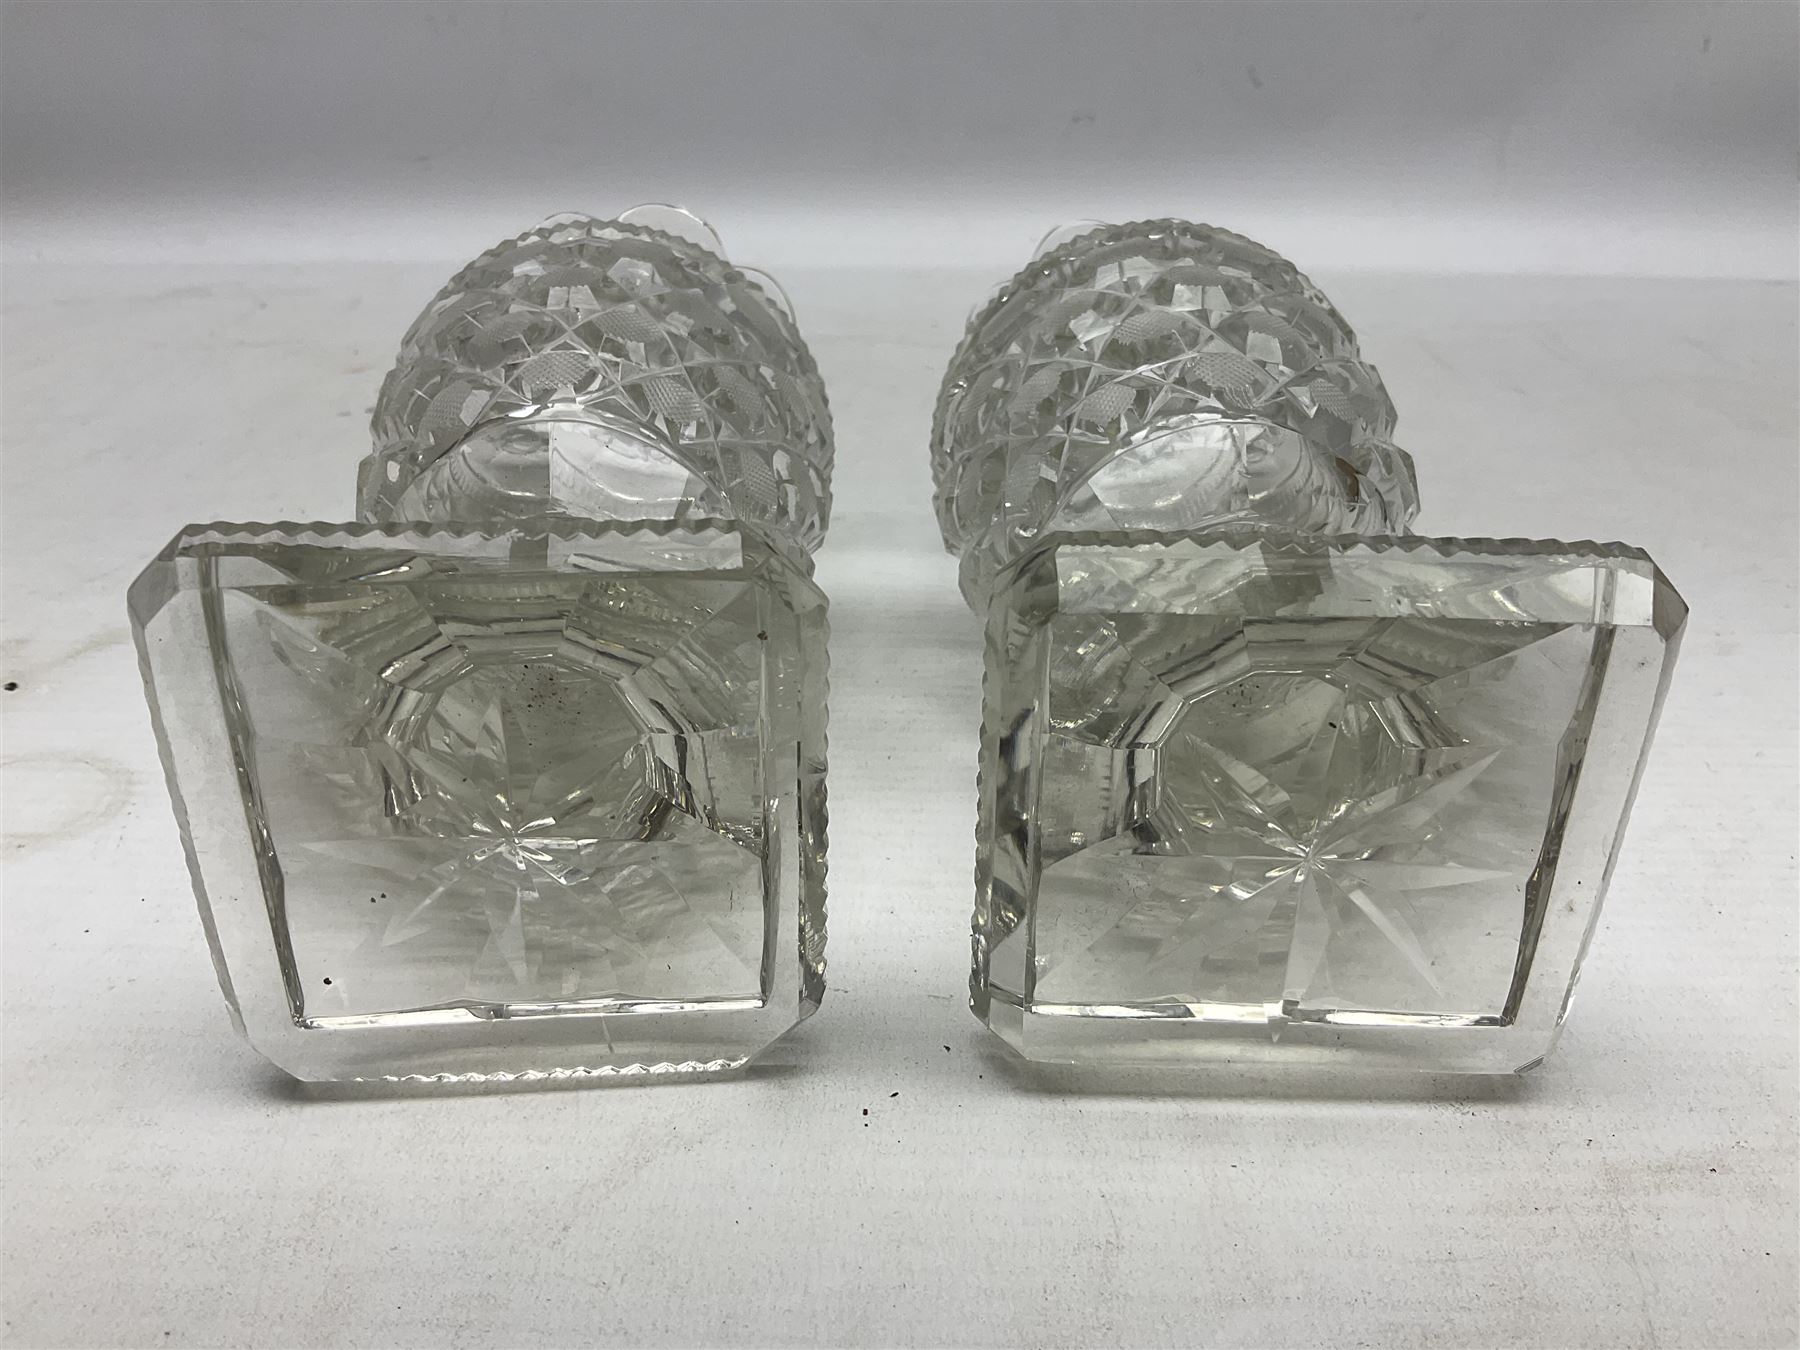 Pair of early 19th century heavy cut glass vases - Image 6 of 6